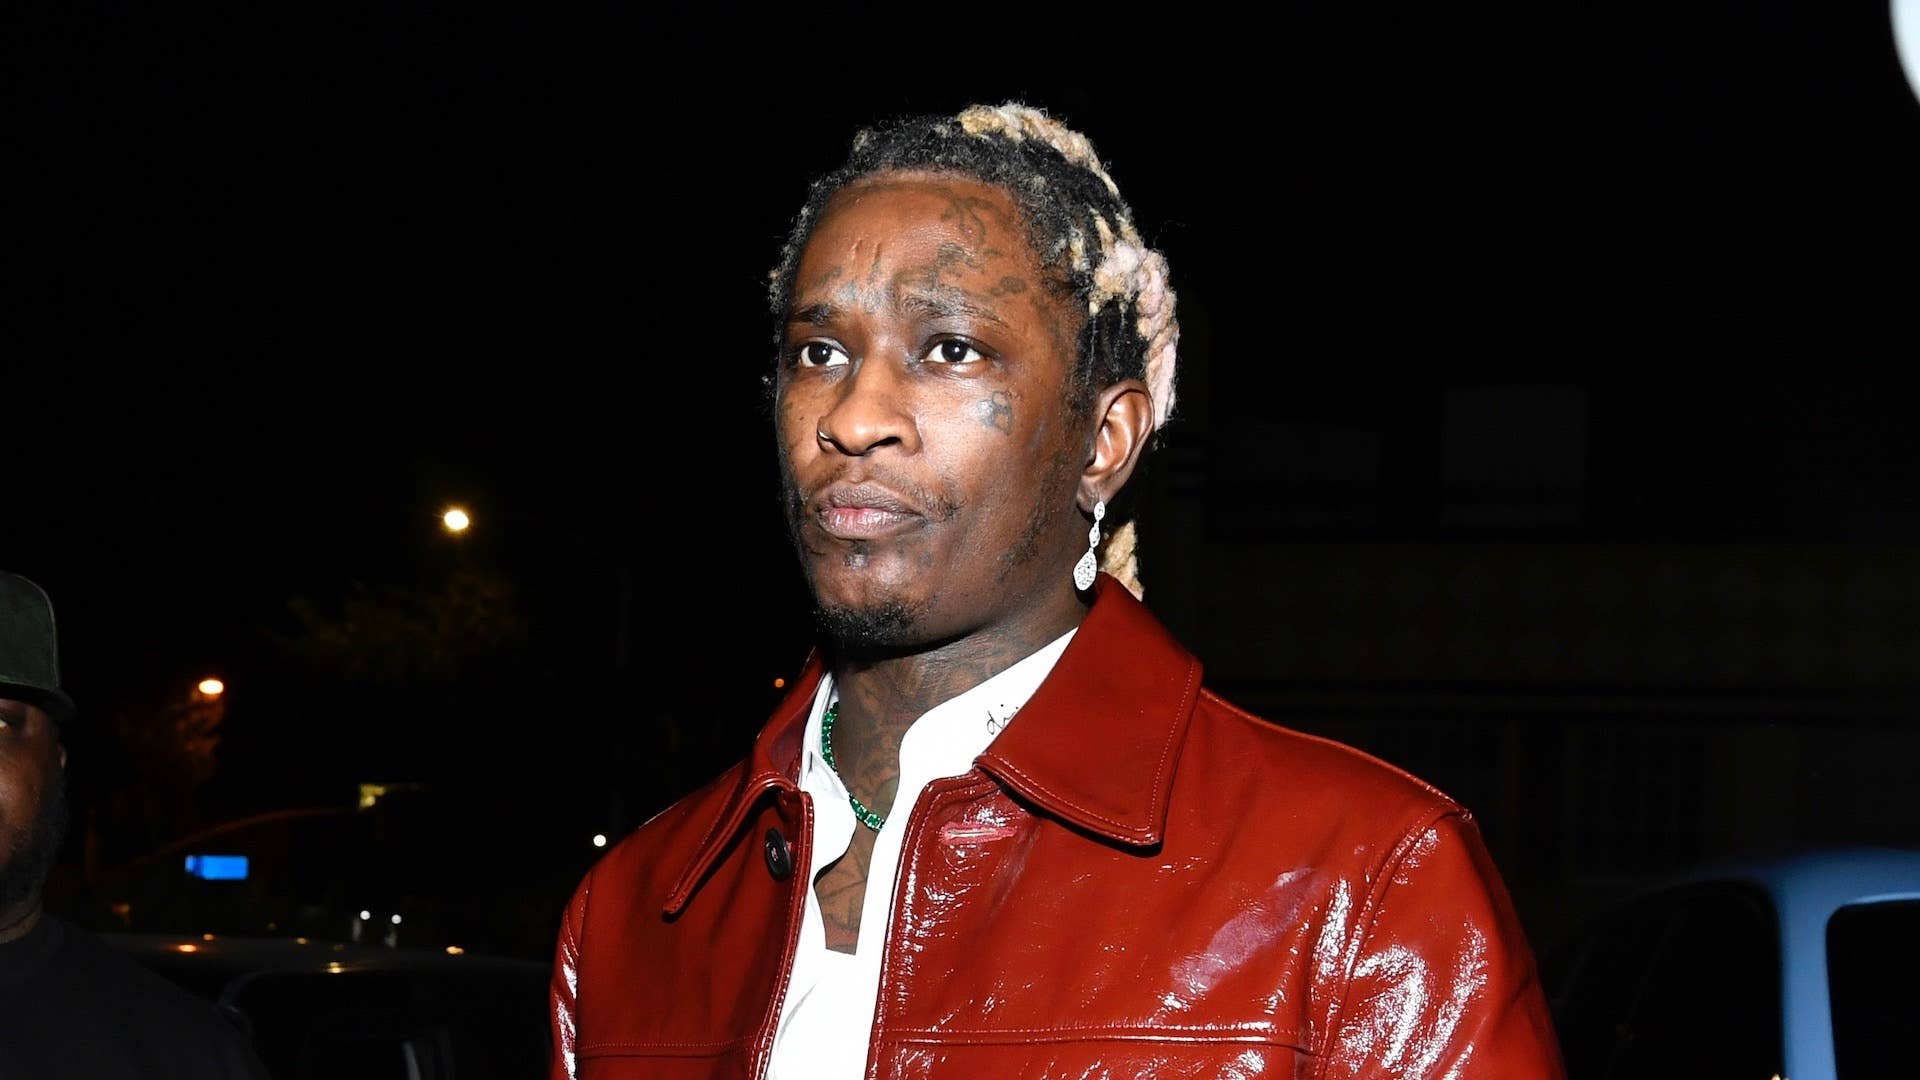 Hip hop artist Young Thug arrives at a release party for his new album "PUNK"